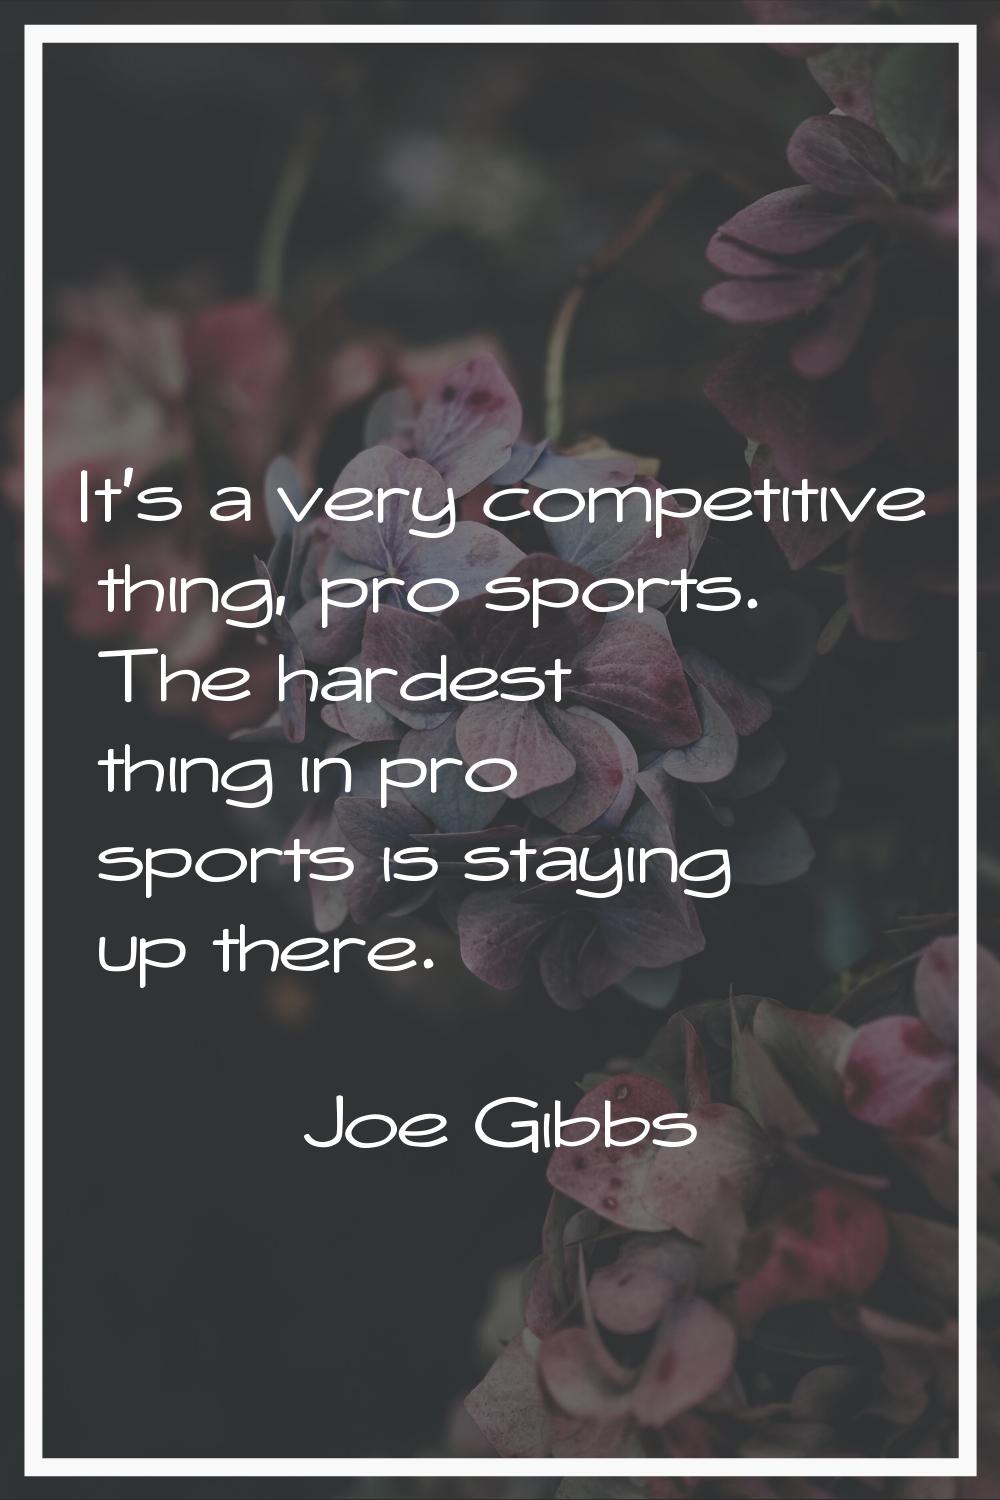 It's a very competitive thing, pro sports. The hardest thing in pro sports is staying up there.